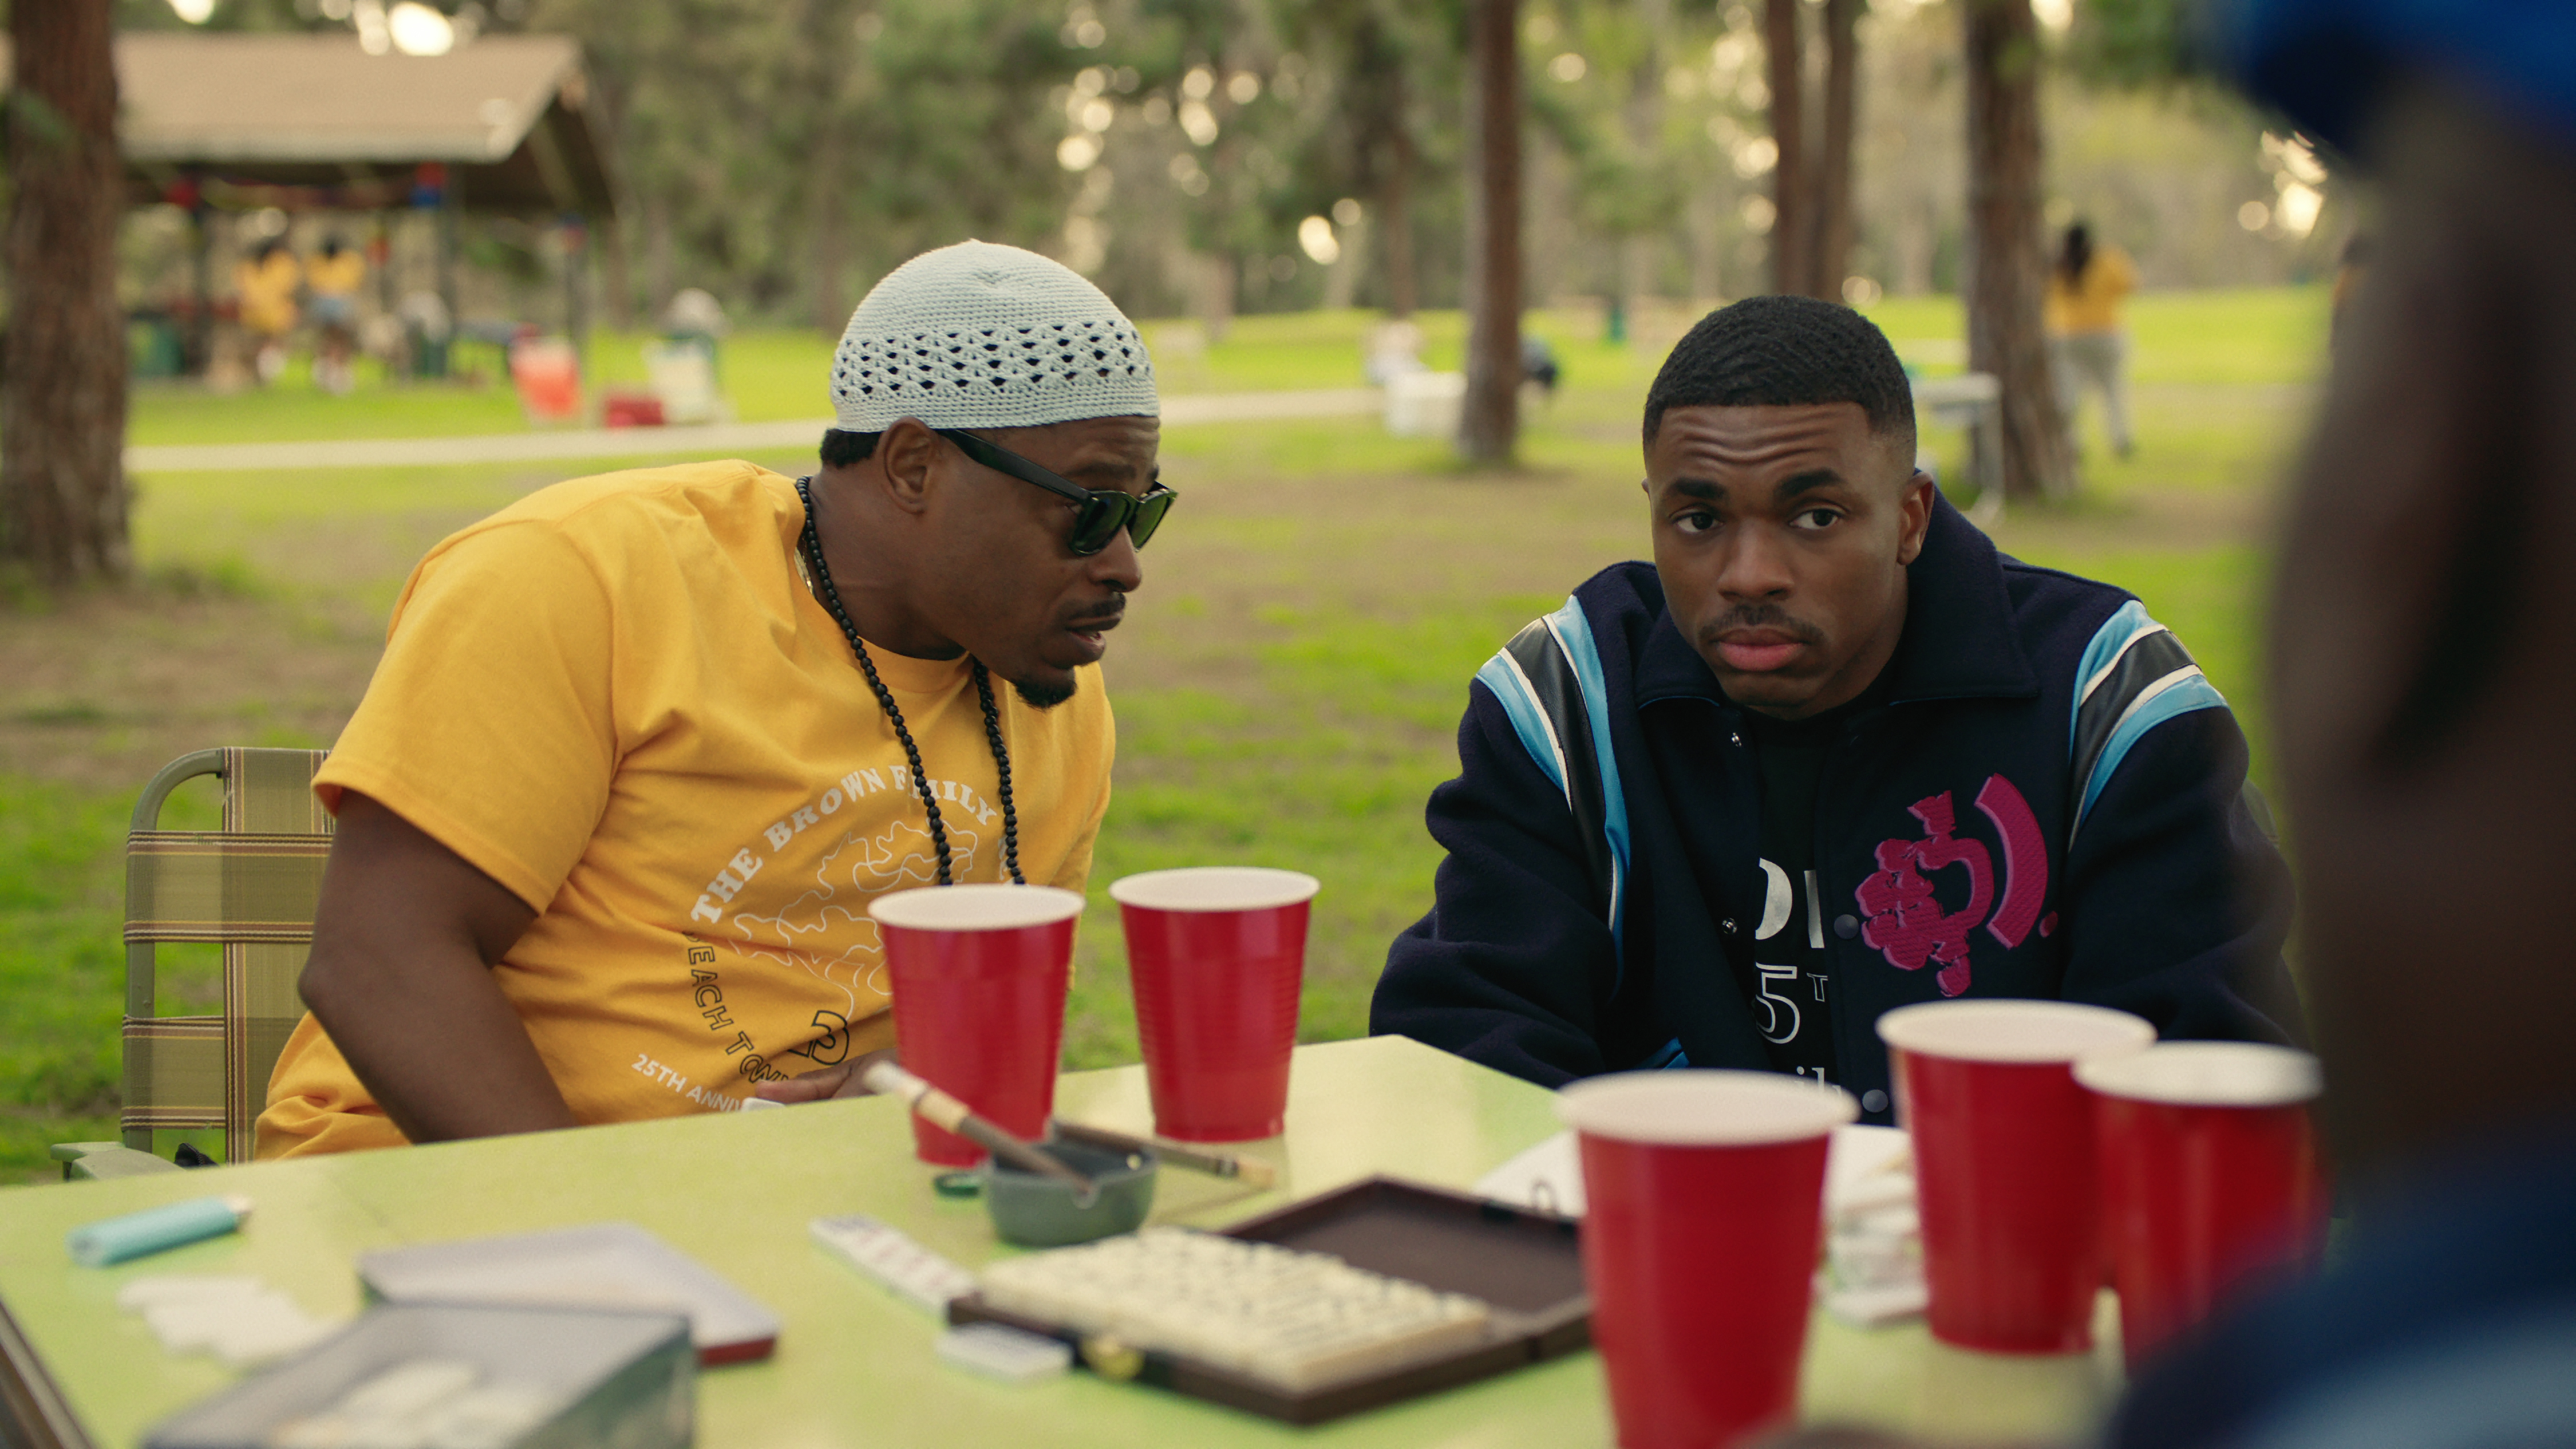 BOSSIP Exclusive: Vince Staples Talks Making The Netflix Series That Took Him From Jail To A Bank, Family Reunion, Amusement Park And School